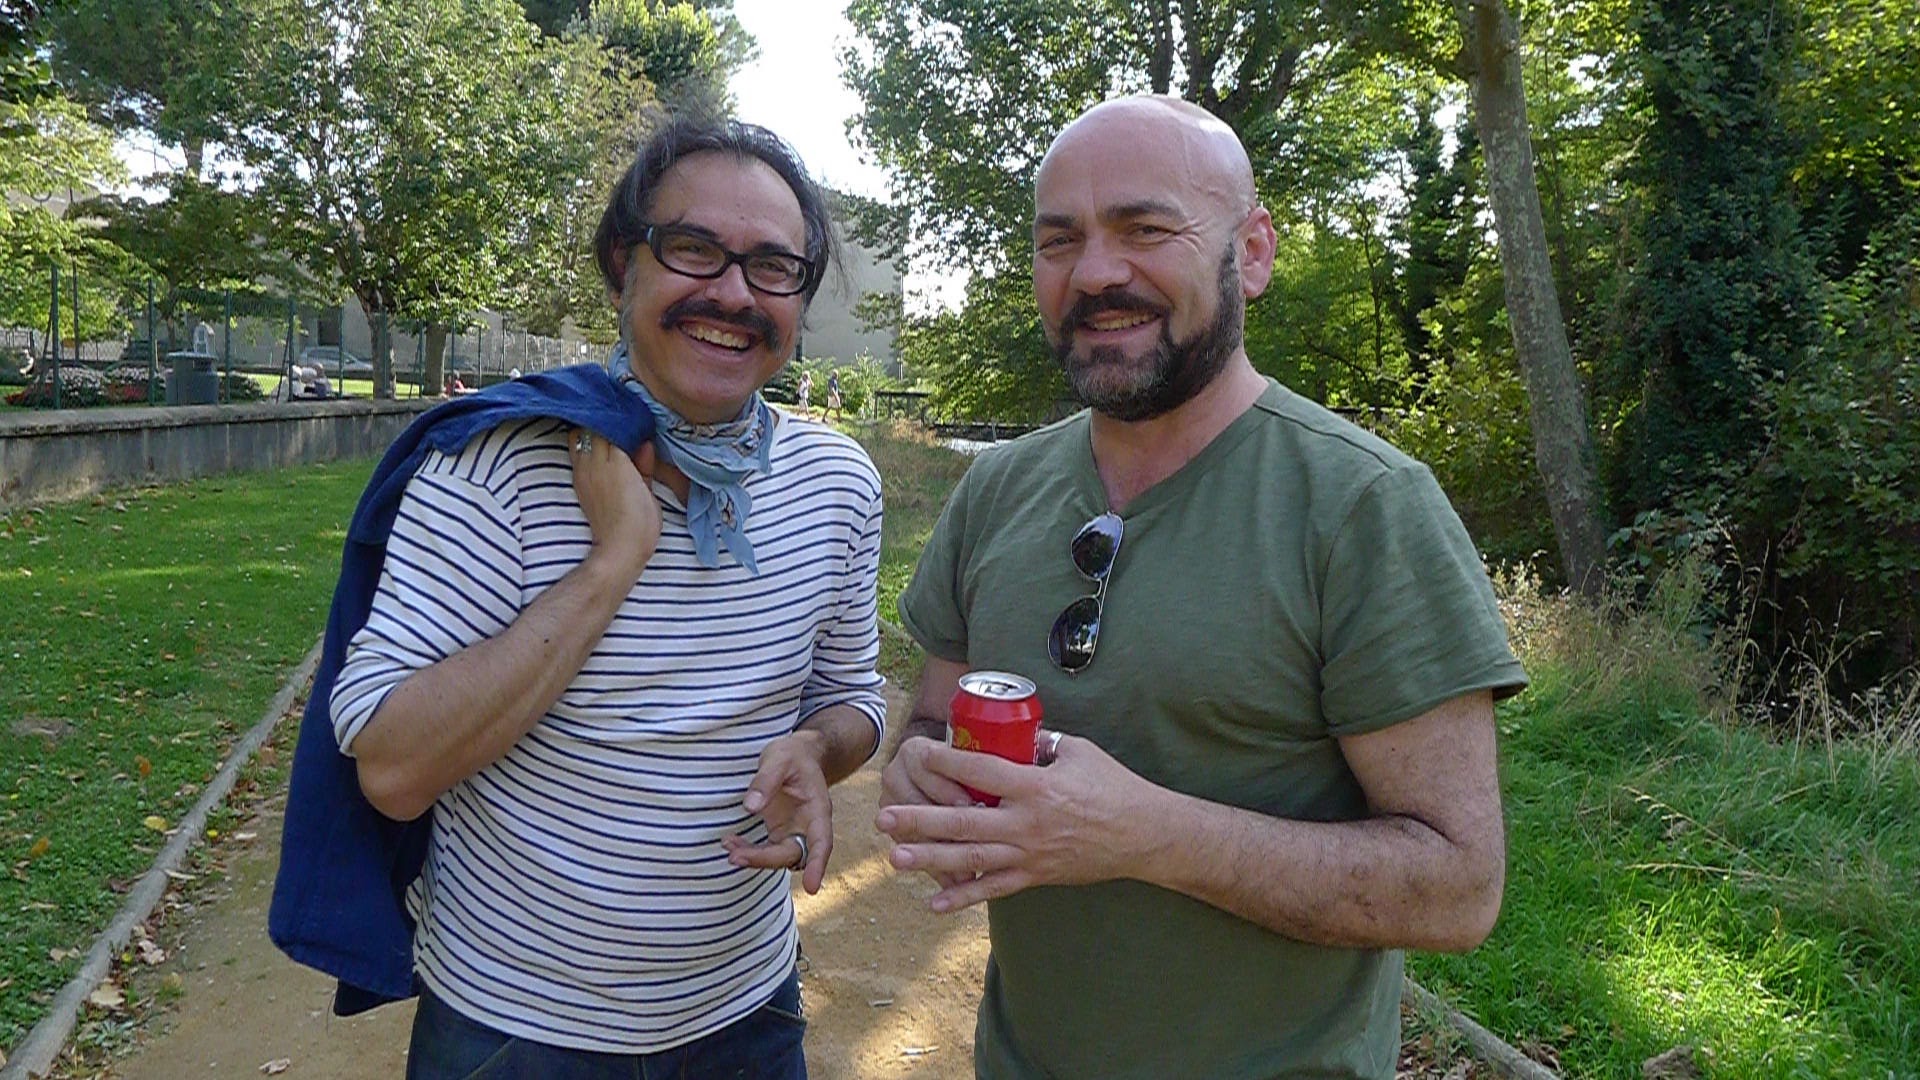 Finitribe's Davie Miller shares a laugh with the Convenanza festival's Bernie Fabre in Carcassonne.